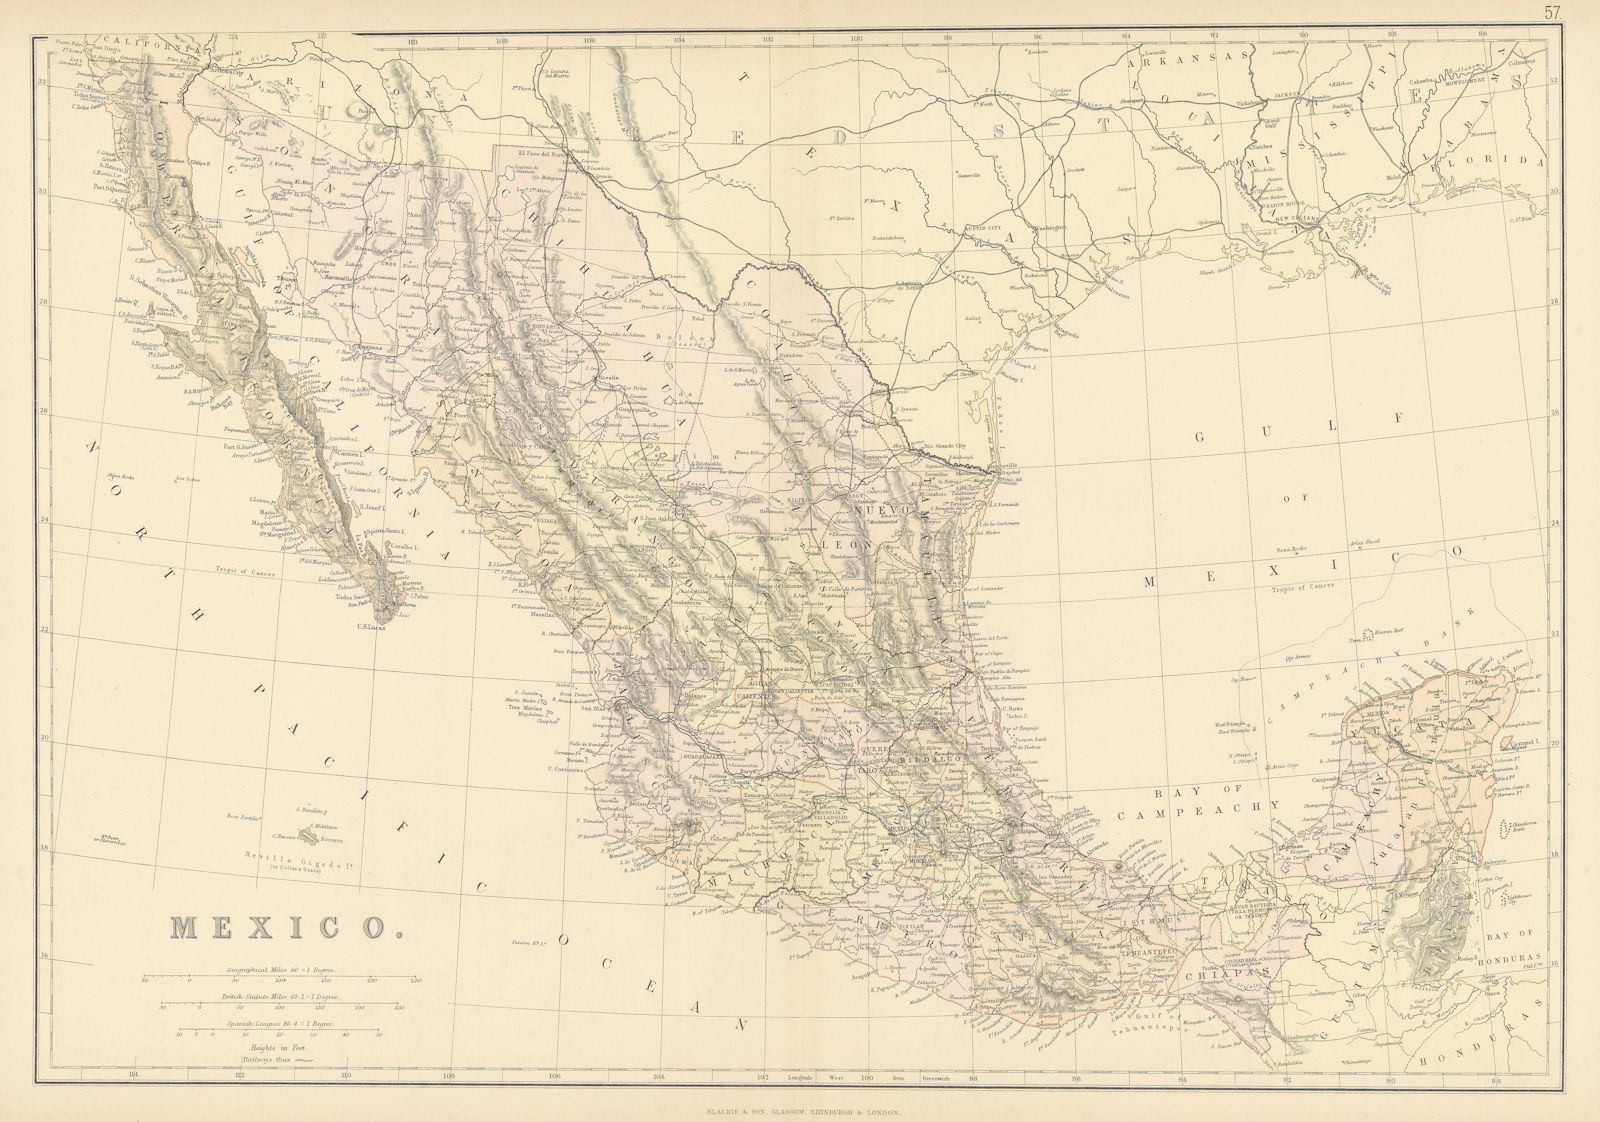 MEXICO. Showing states. Scale in Spanish Leagues. BLACKIE 1886 old antique map